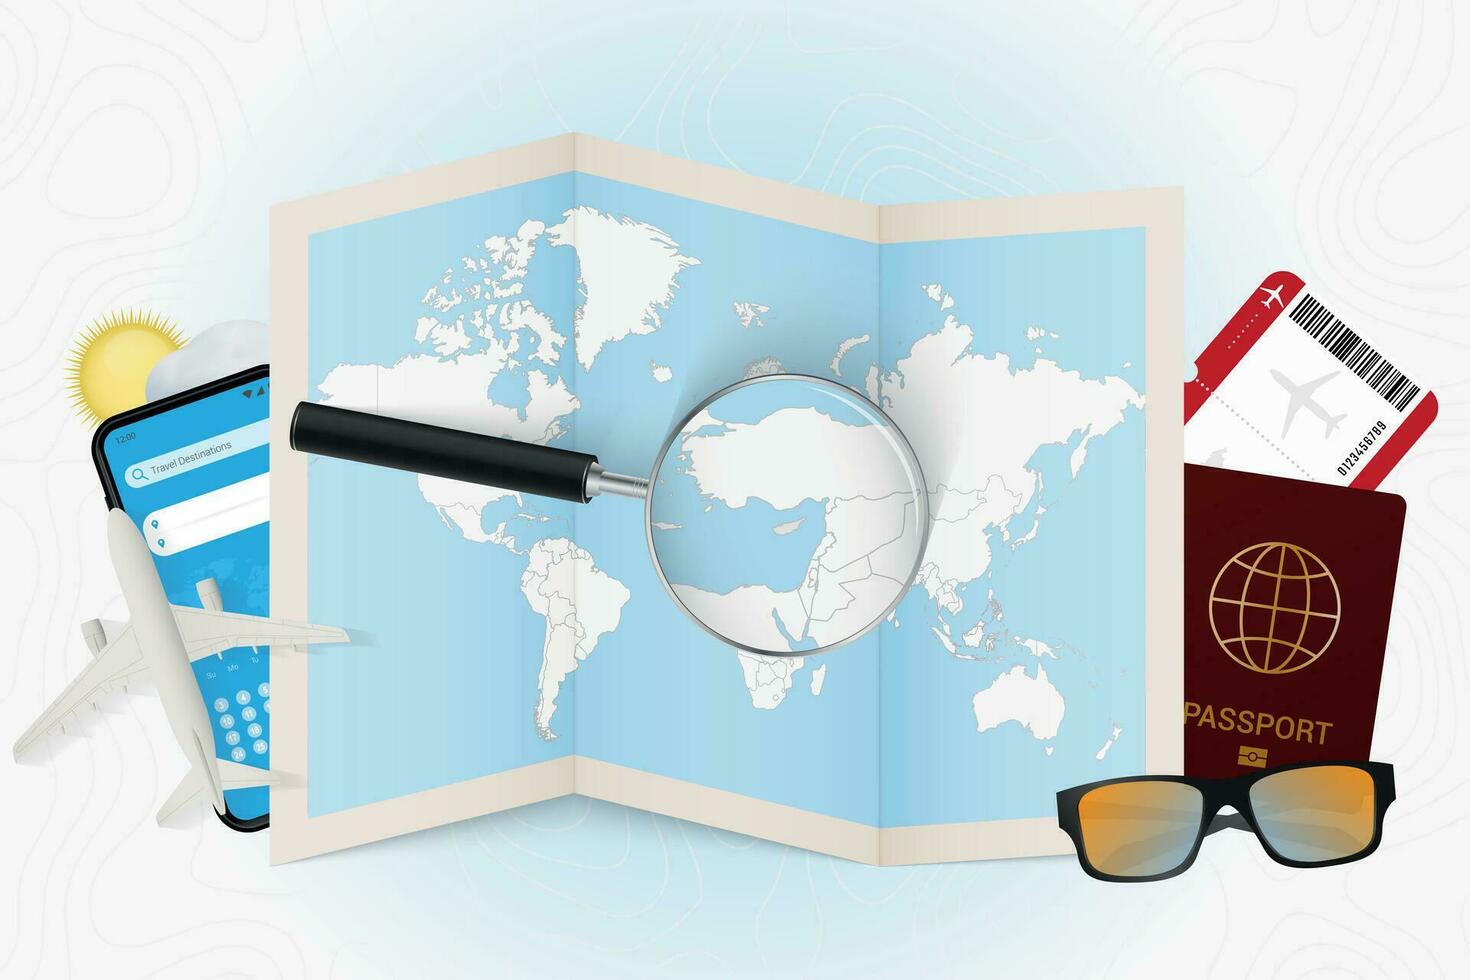 Travel destination Cyprus, tourism mockup with travel equipment and world map with magnifying glass on a Cyprus. vector